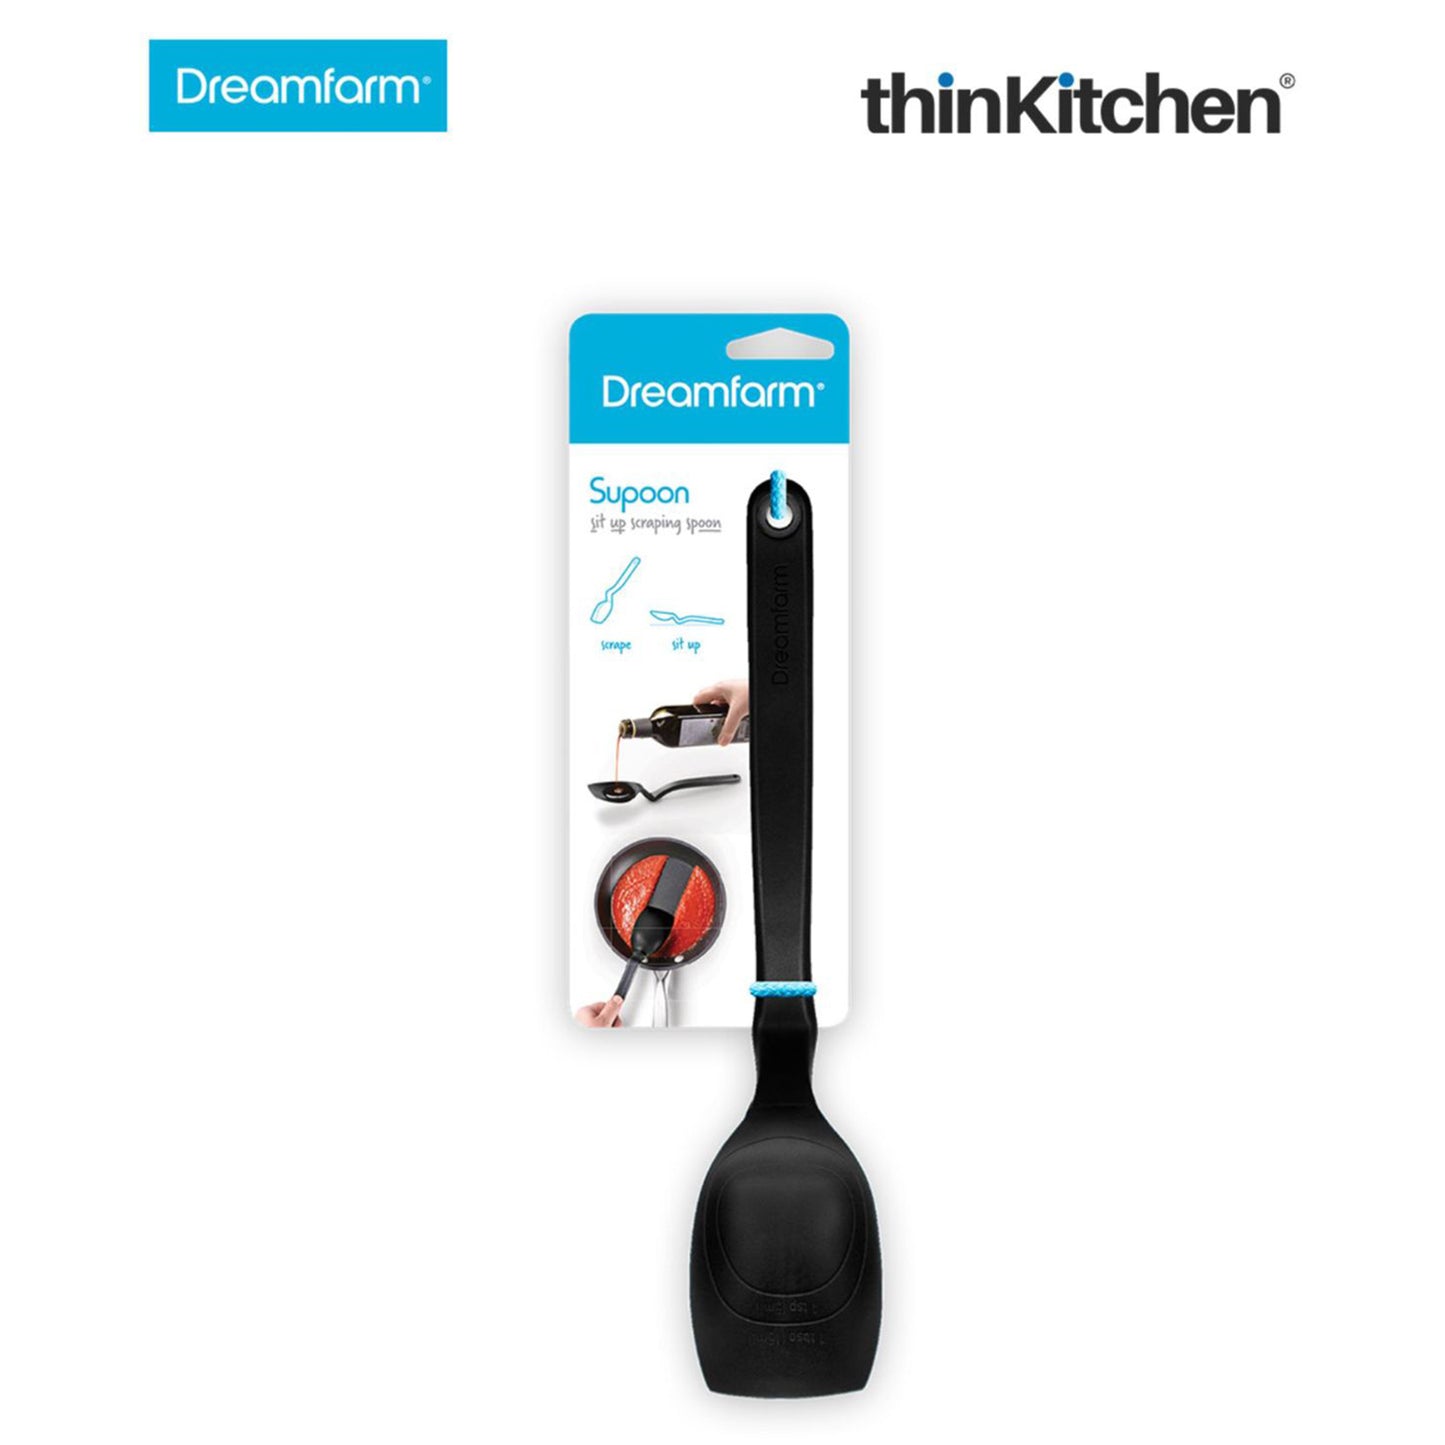 Dreamfarm Spadle Non Stick Cooking Spoon Serving With Measuring Lines Black